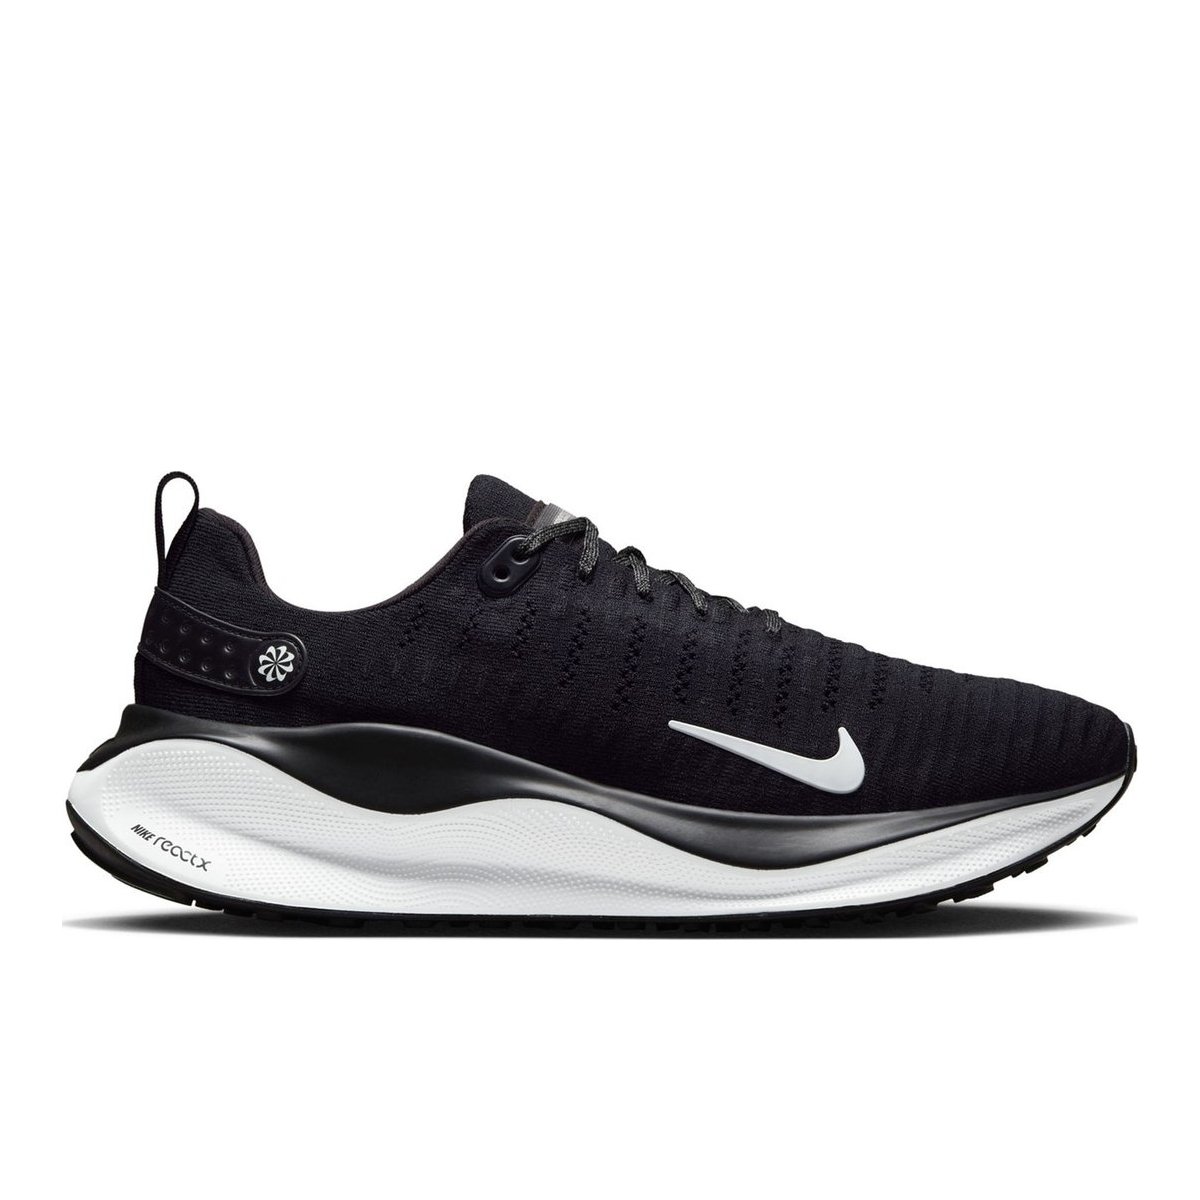 Mens Road Running Shoes